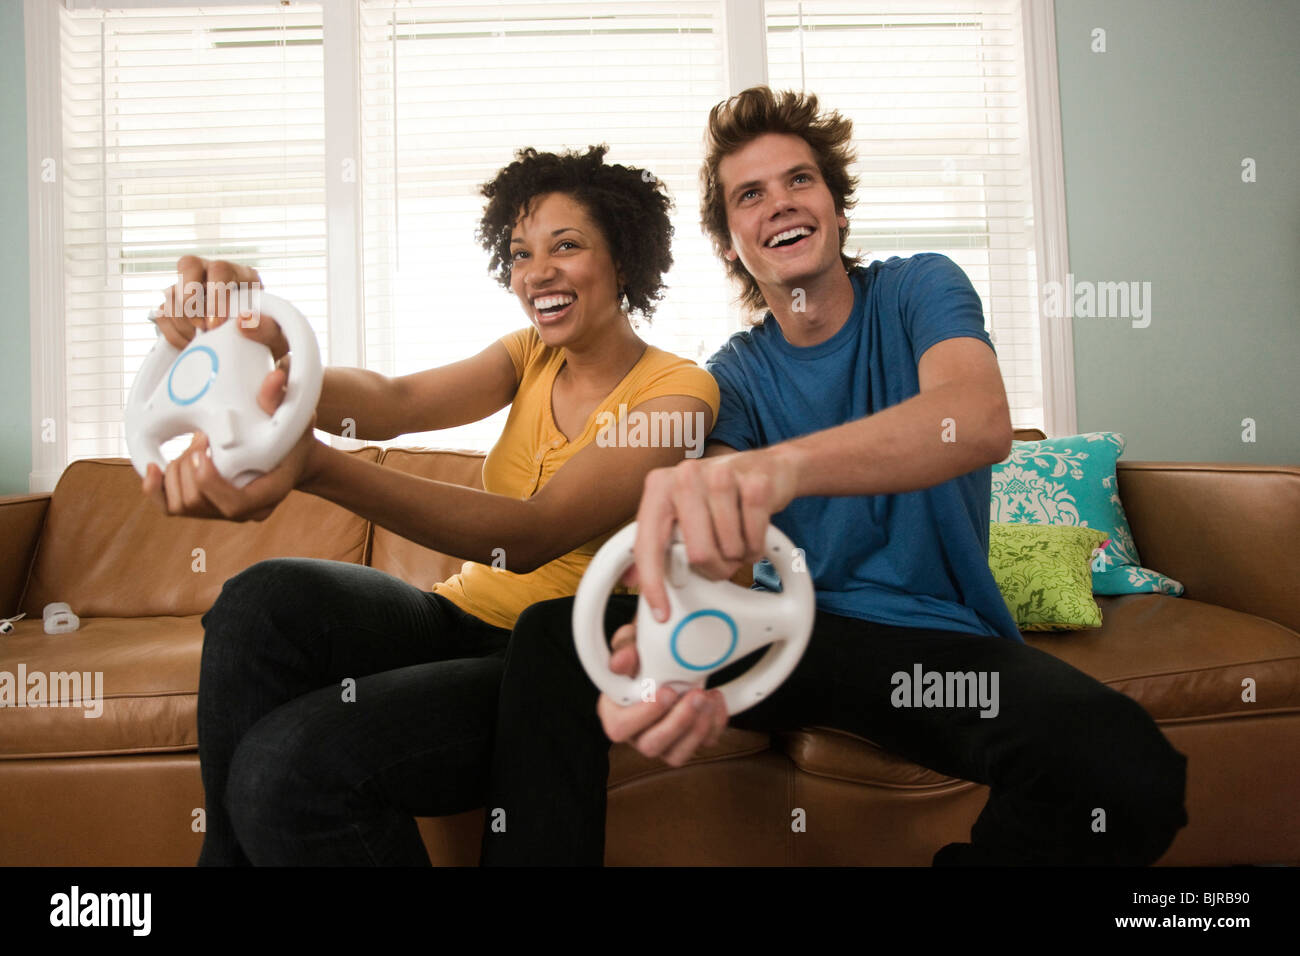 USA, Utah, Provo, young couple playing video games in living room Stock Photo